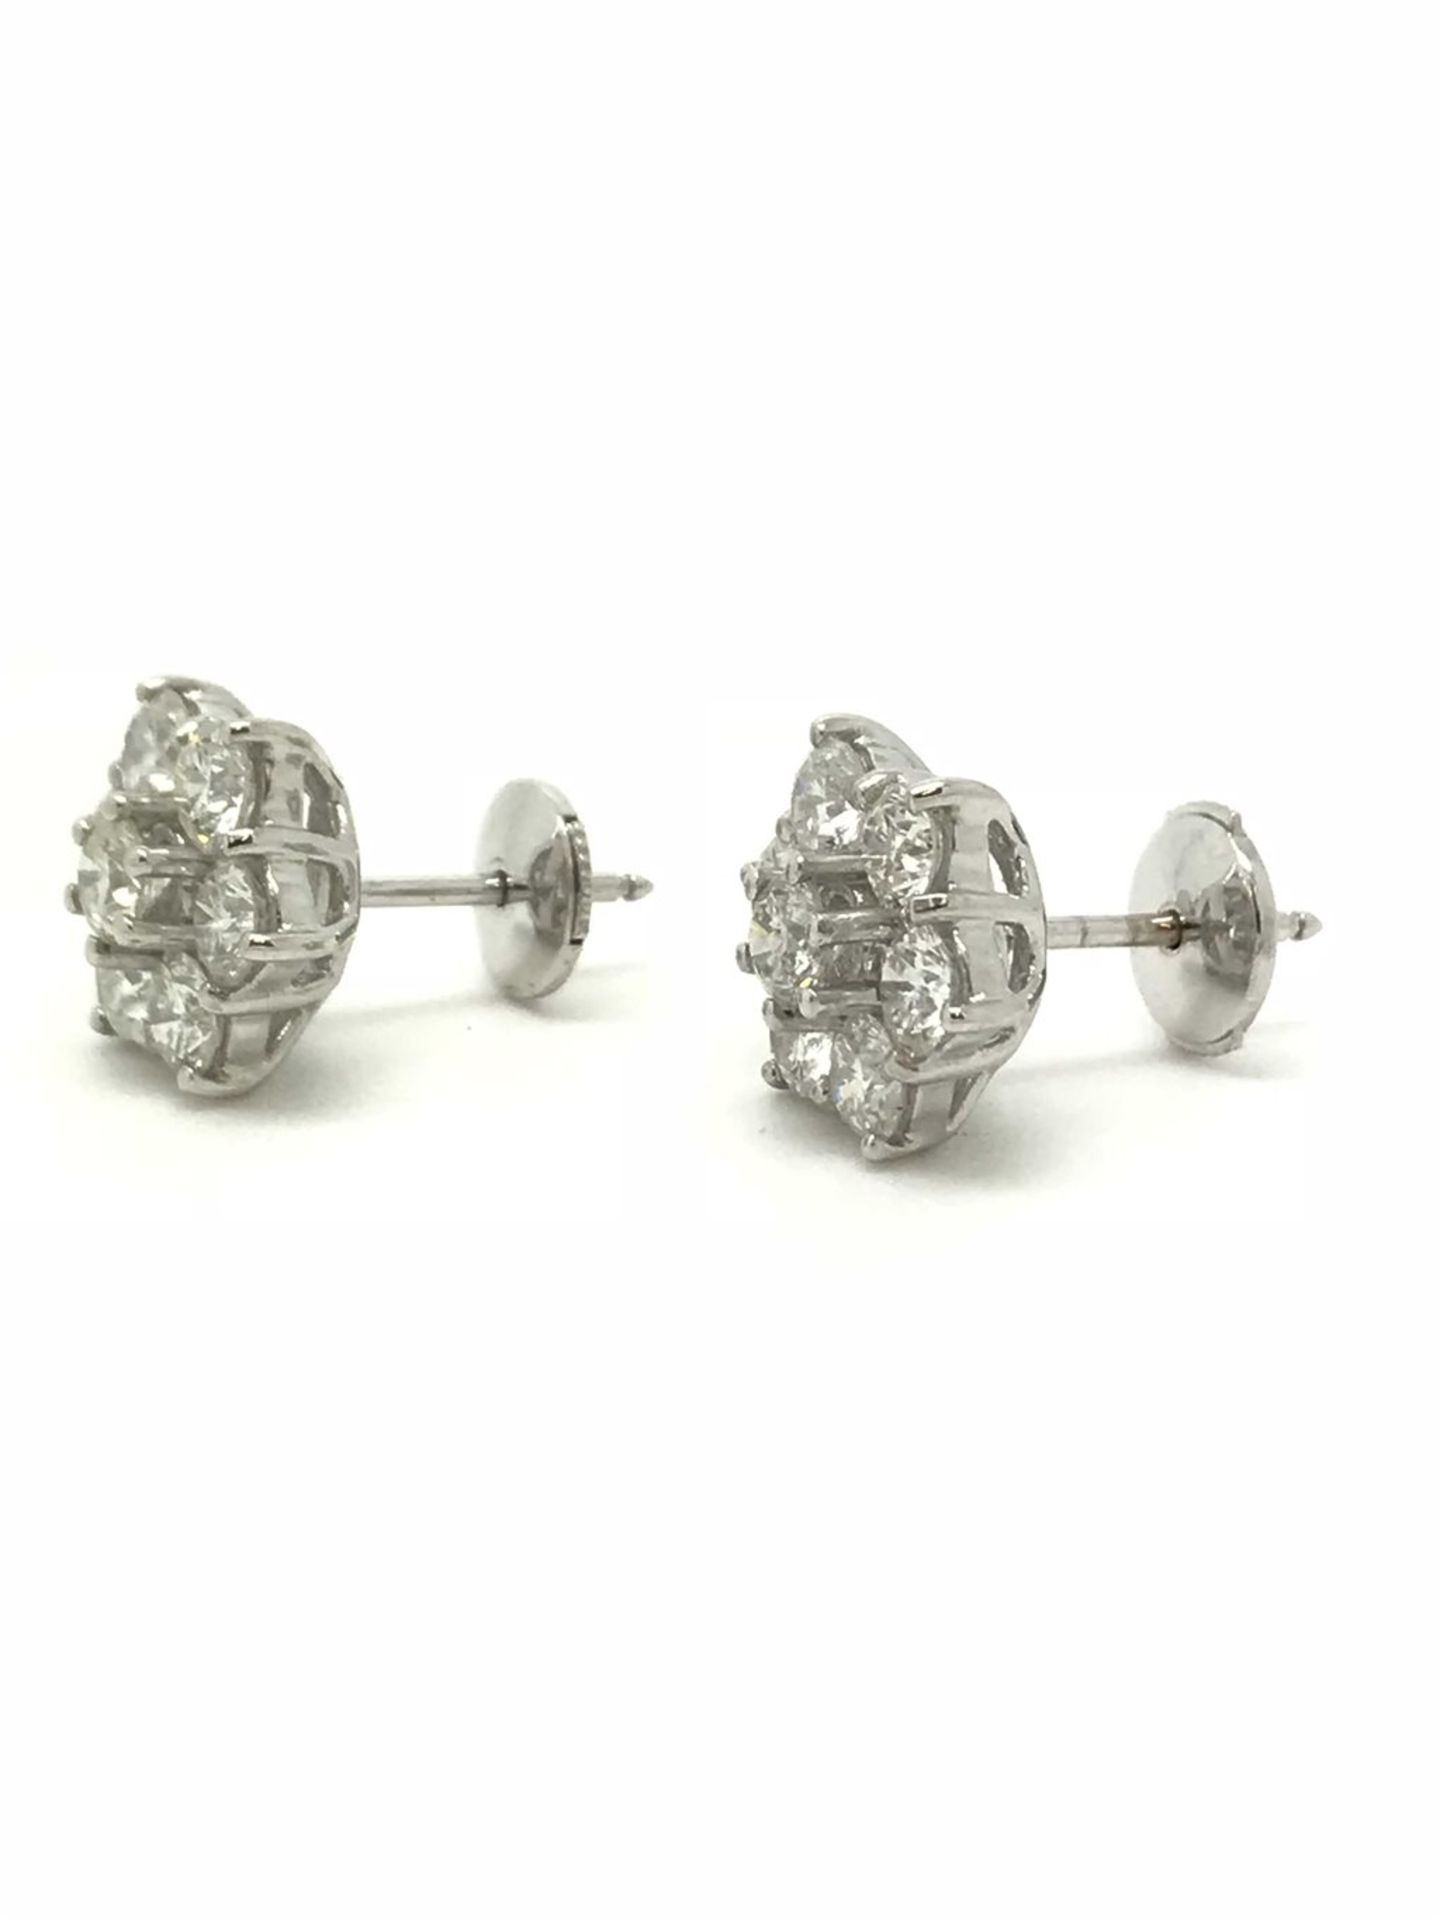 2ct Diamond Cluster Earrings, 18ct White Gold - Image 2 of 4